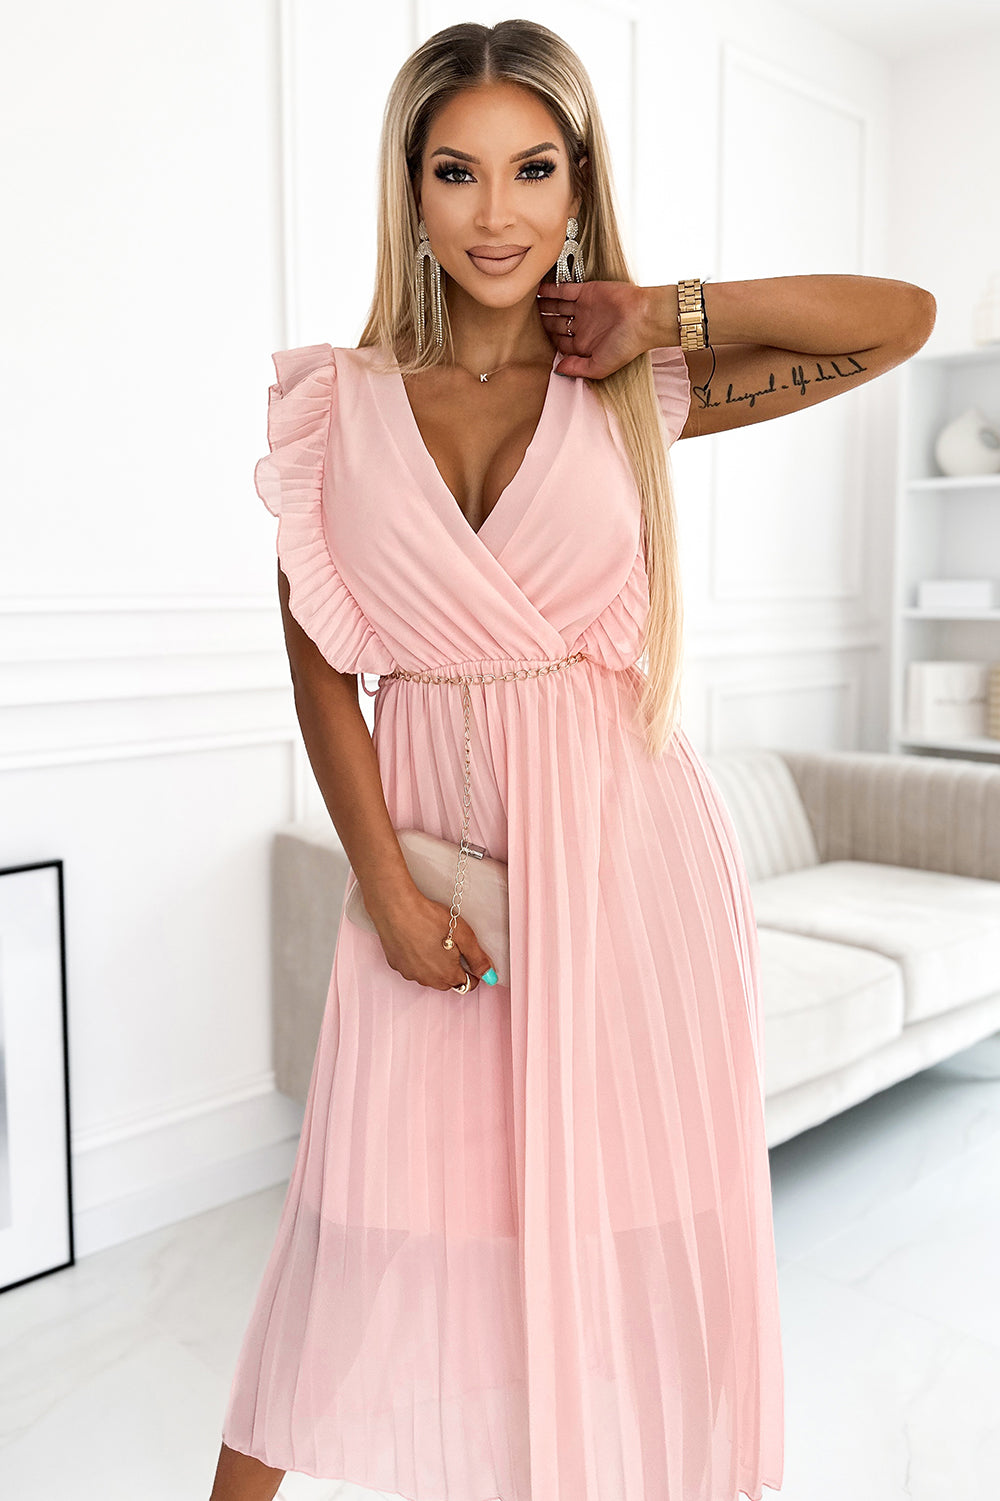 18215-2-470-1 GIORGIA Pleated dress with frills, neckline and gold chain - peach-2